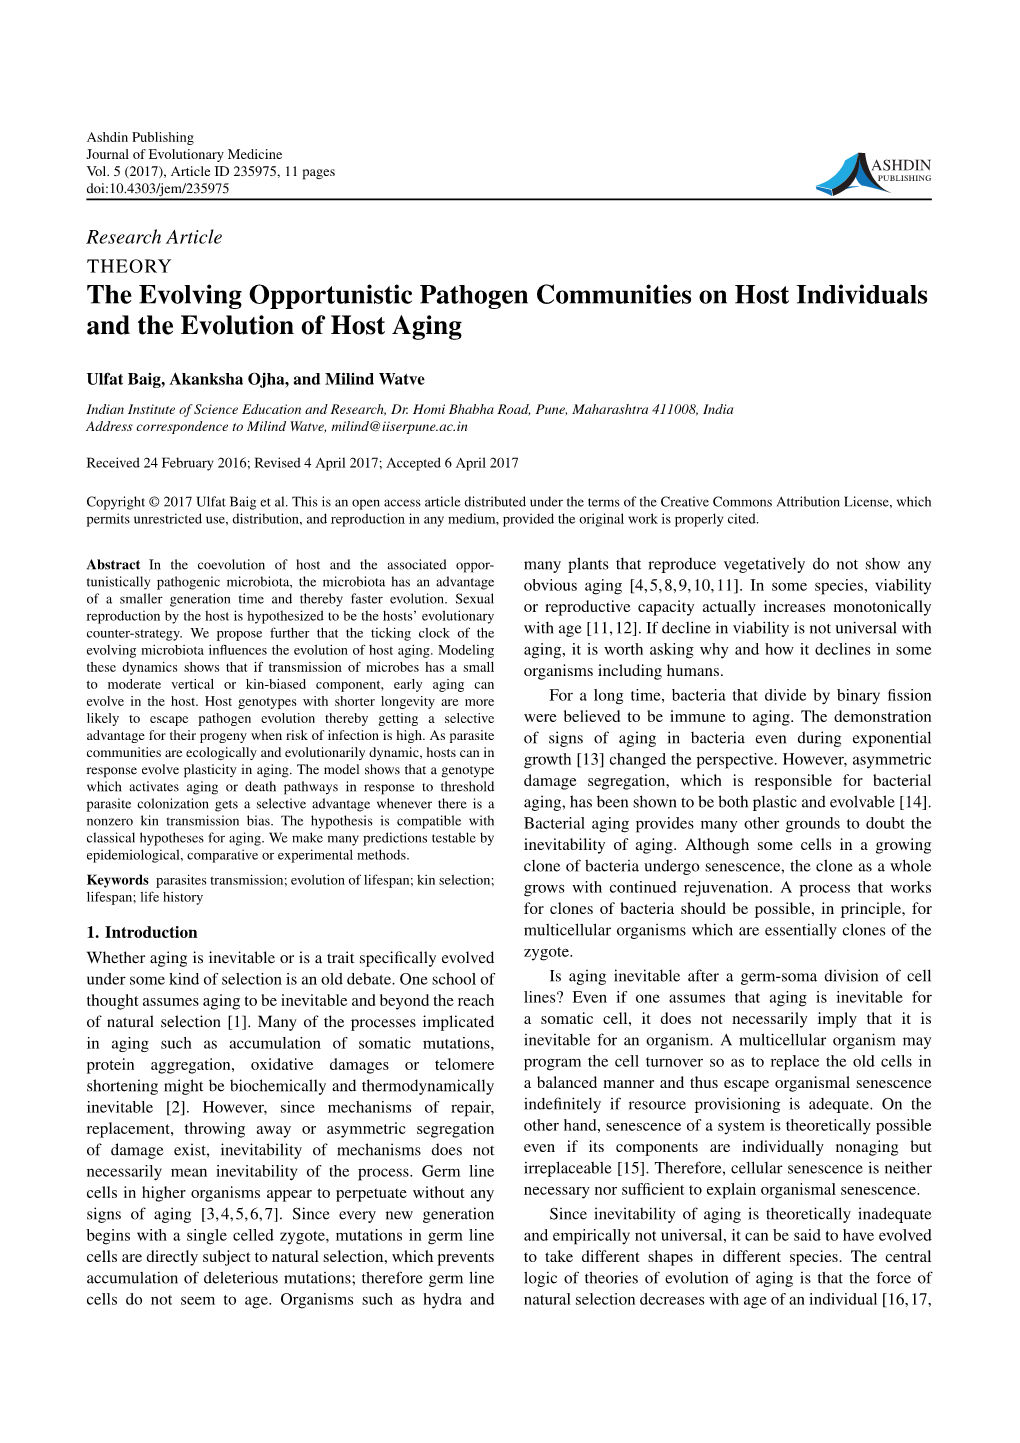 The Evolving Opportunistic Pathogen Communities on Host Individuals and the Evolution of Host Aging